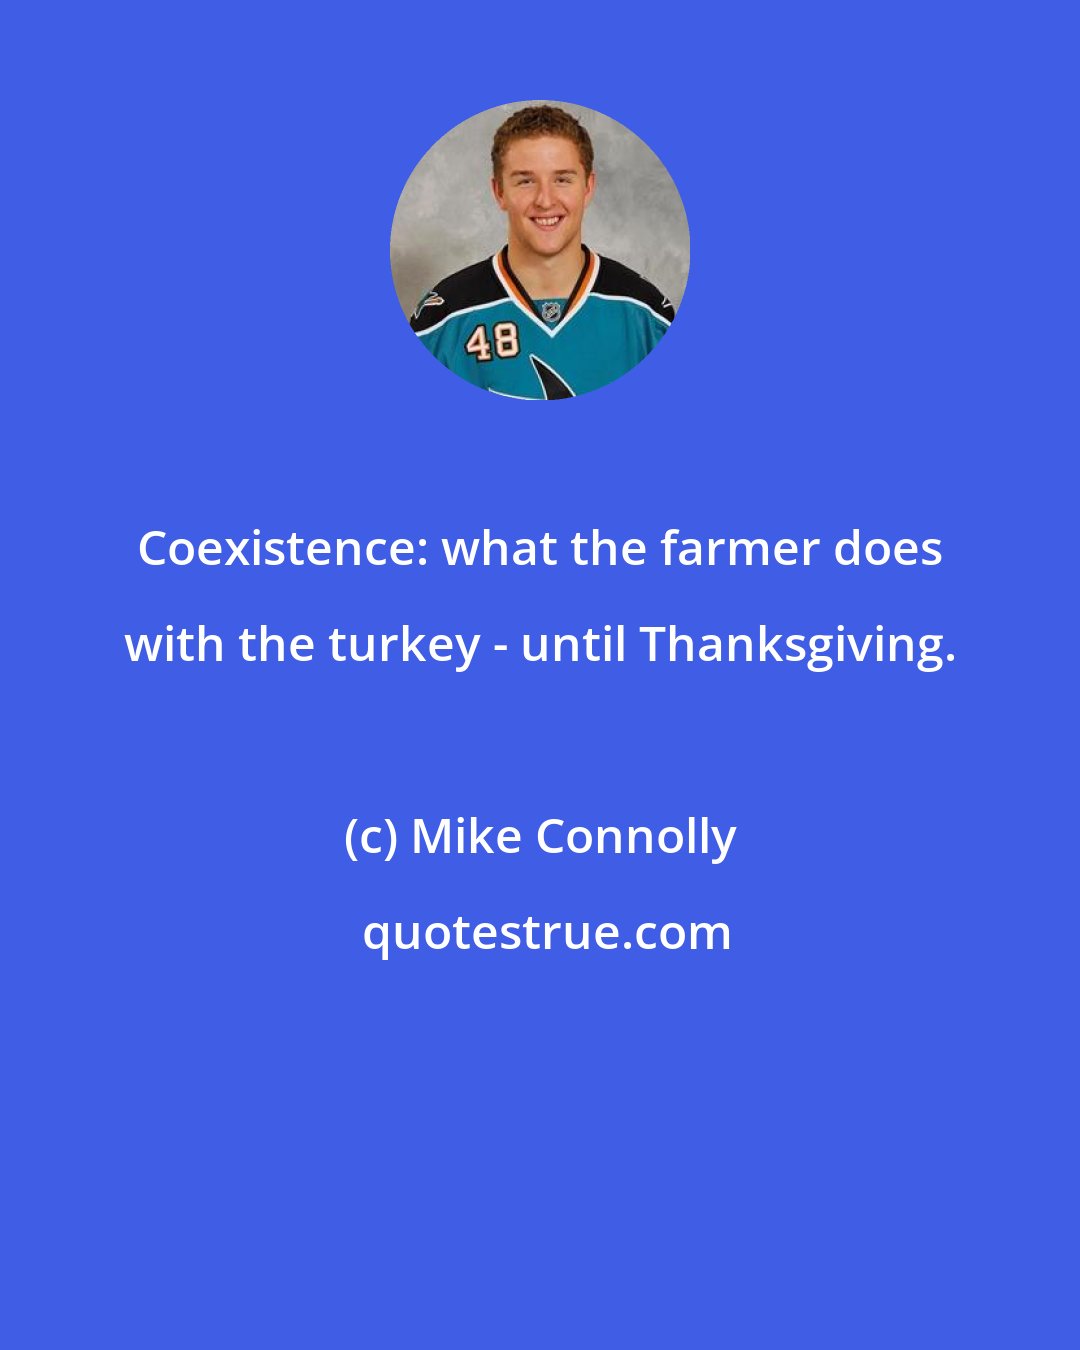 Mike Connolly: Coexistence: what the farmer does with the turkey - until Thanksgiving.